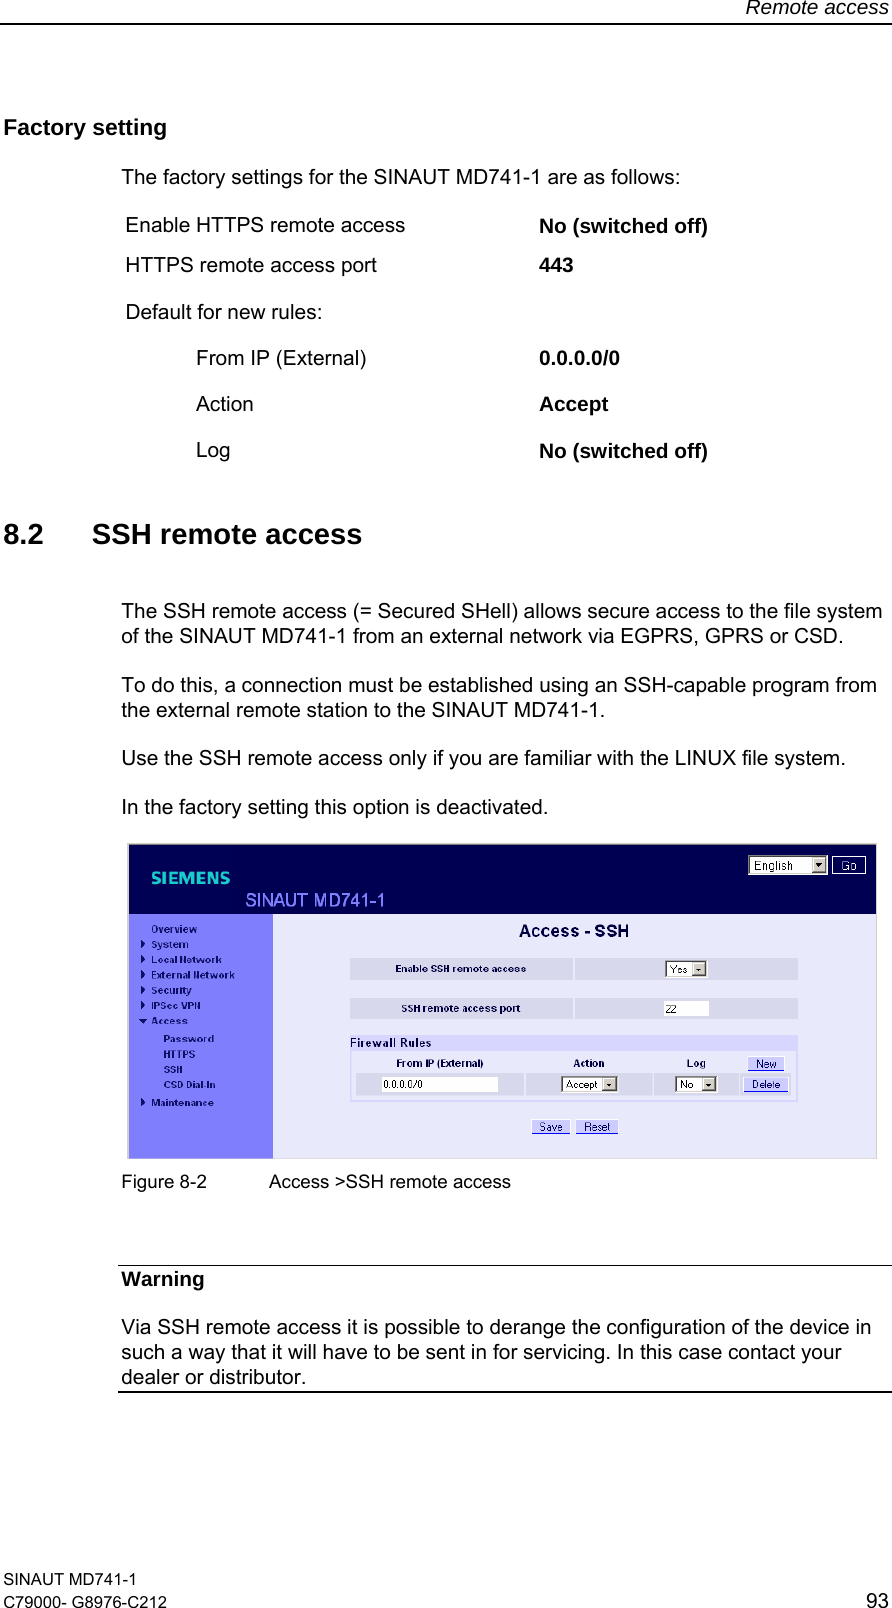 Remote access SINAUT MD741-1 C79000- G8976-C212  93  Factory setting  The factory settings for the SINAUT MD741-1 are as follows: Enable HTTPS remote access  No (switched off) HTTPS remote access port  443 Default for new rules:     From IP (External)  0.0.0.0/0  Action  Accept   Log  No (switched off)  8.2  SSH remote access The SSH remote access (= Secured SHell) allows secure access to the file system of the SINAUT MD741-1 from an external network via EGPRS, GPRS or CSD.  To do this, a connection must be established using an SSH-capable program from the external remote station to the SINAUT MD741-1.  Use the SSH remote access only if you are familiar with the LINUX file system.  In the factory setting this option is deactivated.     Figure 8-2  Access &gt;SSH remote access  Warning Via SSH remote access it is possible to derange the configuration of the device in such a way that it will have to be sent in for servicing. In this case contact your dealer or distributor. 